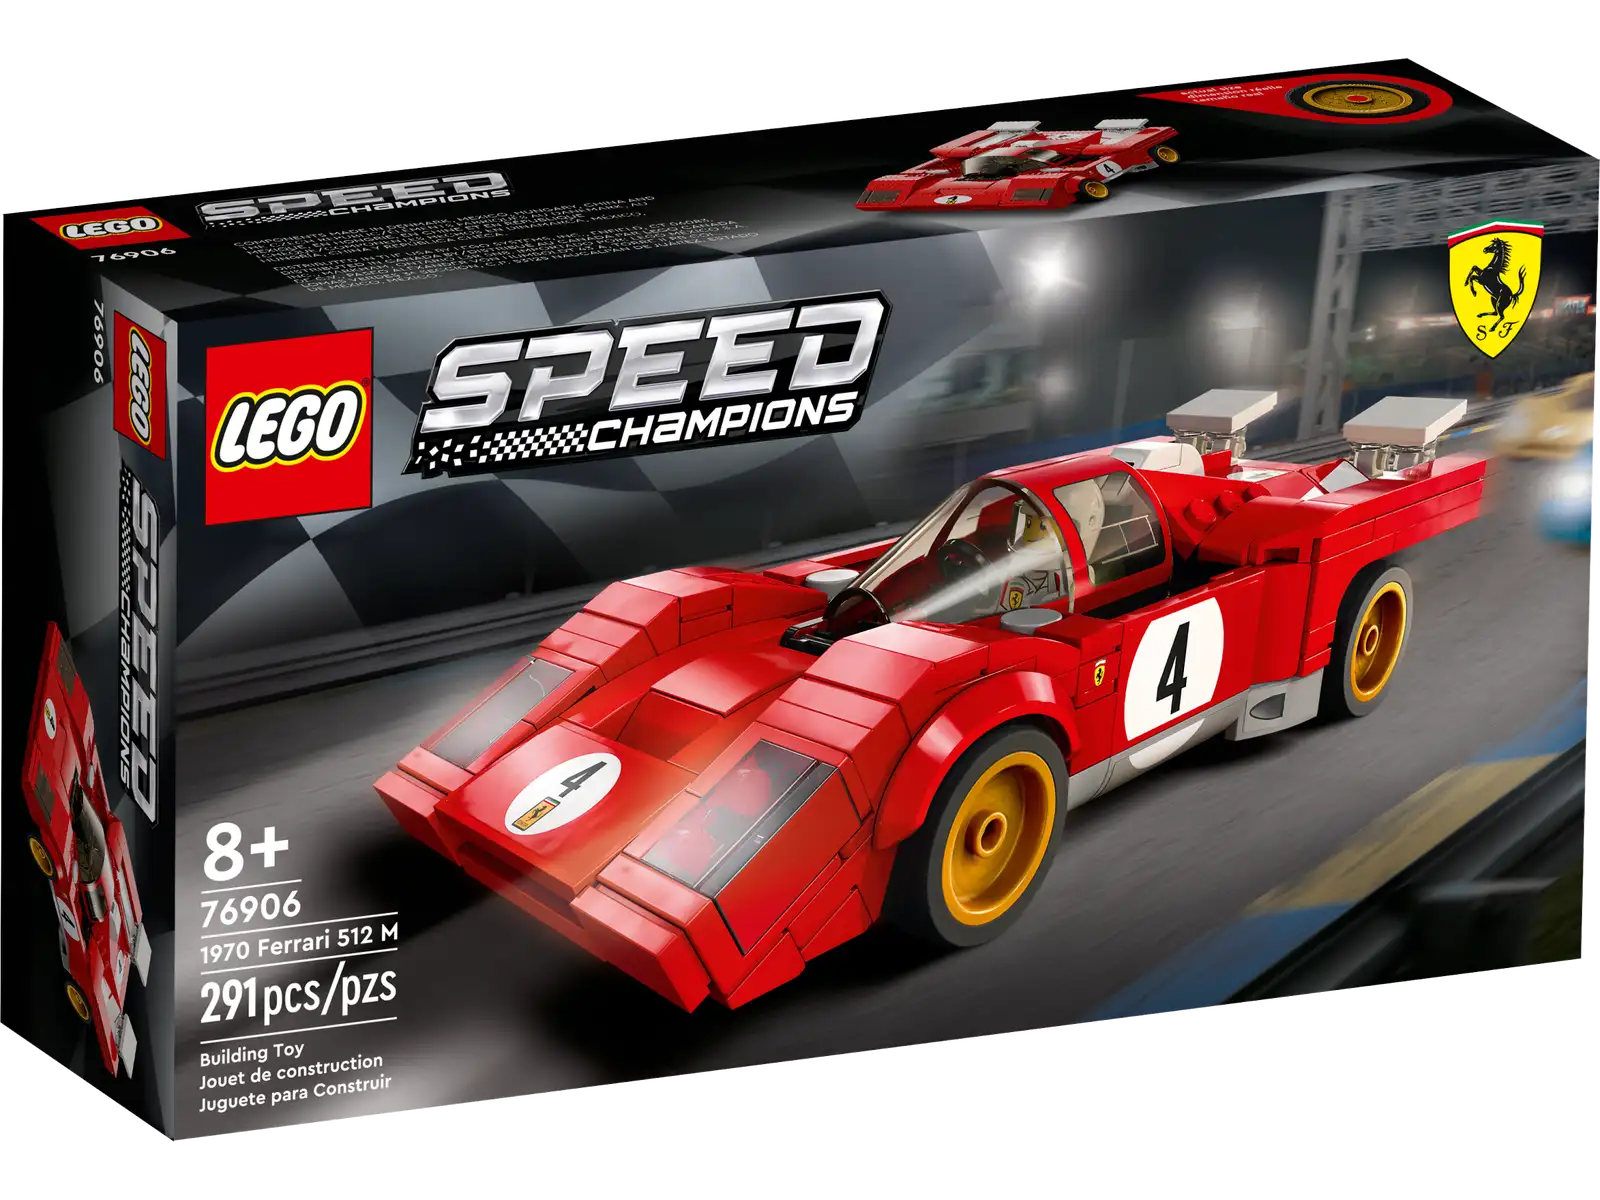 The LEGO® Speed Champions 1970 Ferrari 512 M (76906) construction set gives kids and car enthusiasts of all ages the chance to collect, build and explore an iconic race car. Perfect for play and display, this faithful LEGO recreation captures the essence of the legendary 1970’s endurance race car – famed for its fearsome performance and epic on-track duels. Digital building instructions This collectible toy race car includes printed and interactive digital building instructions. Available in the free LEGO Building Instructions app for smartphones and tablets, the intuitive digital guide comes with amazing zoom and rotate tools that allow you to visualize a model from all angles as you build. Celebrating engineering ingenuity LEGO Speed Champions building sets deliver mini versions of the world’s leading and best-known vehicles. Popular with kids and adults, the high-quality models are great for display or for thrilling race action against other vehicles from the Speed Champions range. Recreation of the iconic 1970 Ferrari 512 M –Toy replica model for car enthusiasts and kids who love imaginative race action What’s in the box? – Everything you need to build a LEGO® interpretation of the 1970 Ferrari 512 M, plus a Ferrari racing driver complete with race suit, wig and crash helmet Collect, play and display – Kids and car fans get to explore the 1970 Ferrari 512 M as they build, before exhibiting their work or joining friends for Speed Champions race action A gift for any occasion – This 291-piece LEGO® Speed Champions 1970 Ferrari 512 M (76906) model can be given as a birthday gift or any-other-day surprise for kids and race car fans aged 8 and up Packed with details – The Ferrari 512 M model measures over 1.5 in. (4cm) high, 6.5 in. (15cm) long and 2.5 in. (7cm) wide. Plenty of room for a driver minifigure and lots of authentic detailing No batteries required – This cool toy car is powered by kids’ imaginations – so the racing fun never stops! Interactive digital building instructions – Zoom, rotate and view models from all angles as you build with the LEGO® Building Instructions app, available for smartphones and tablets Discover the makeup of your favorite vehicles – LEGO® Speed Champions building sets give kids and adults the chance to explore some of the world’s most iconic vehicles Putting quality in focus – LEGO® components meet strict industry standards to ensure they’re consistent, compatible and fun to build with – it’s been that way since 1958 Tested for safety – All LEGO® building toys are thoroughly tested to ensure every playset meets strict safety standards